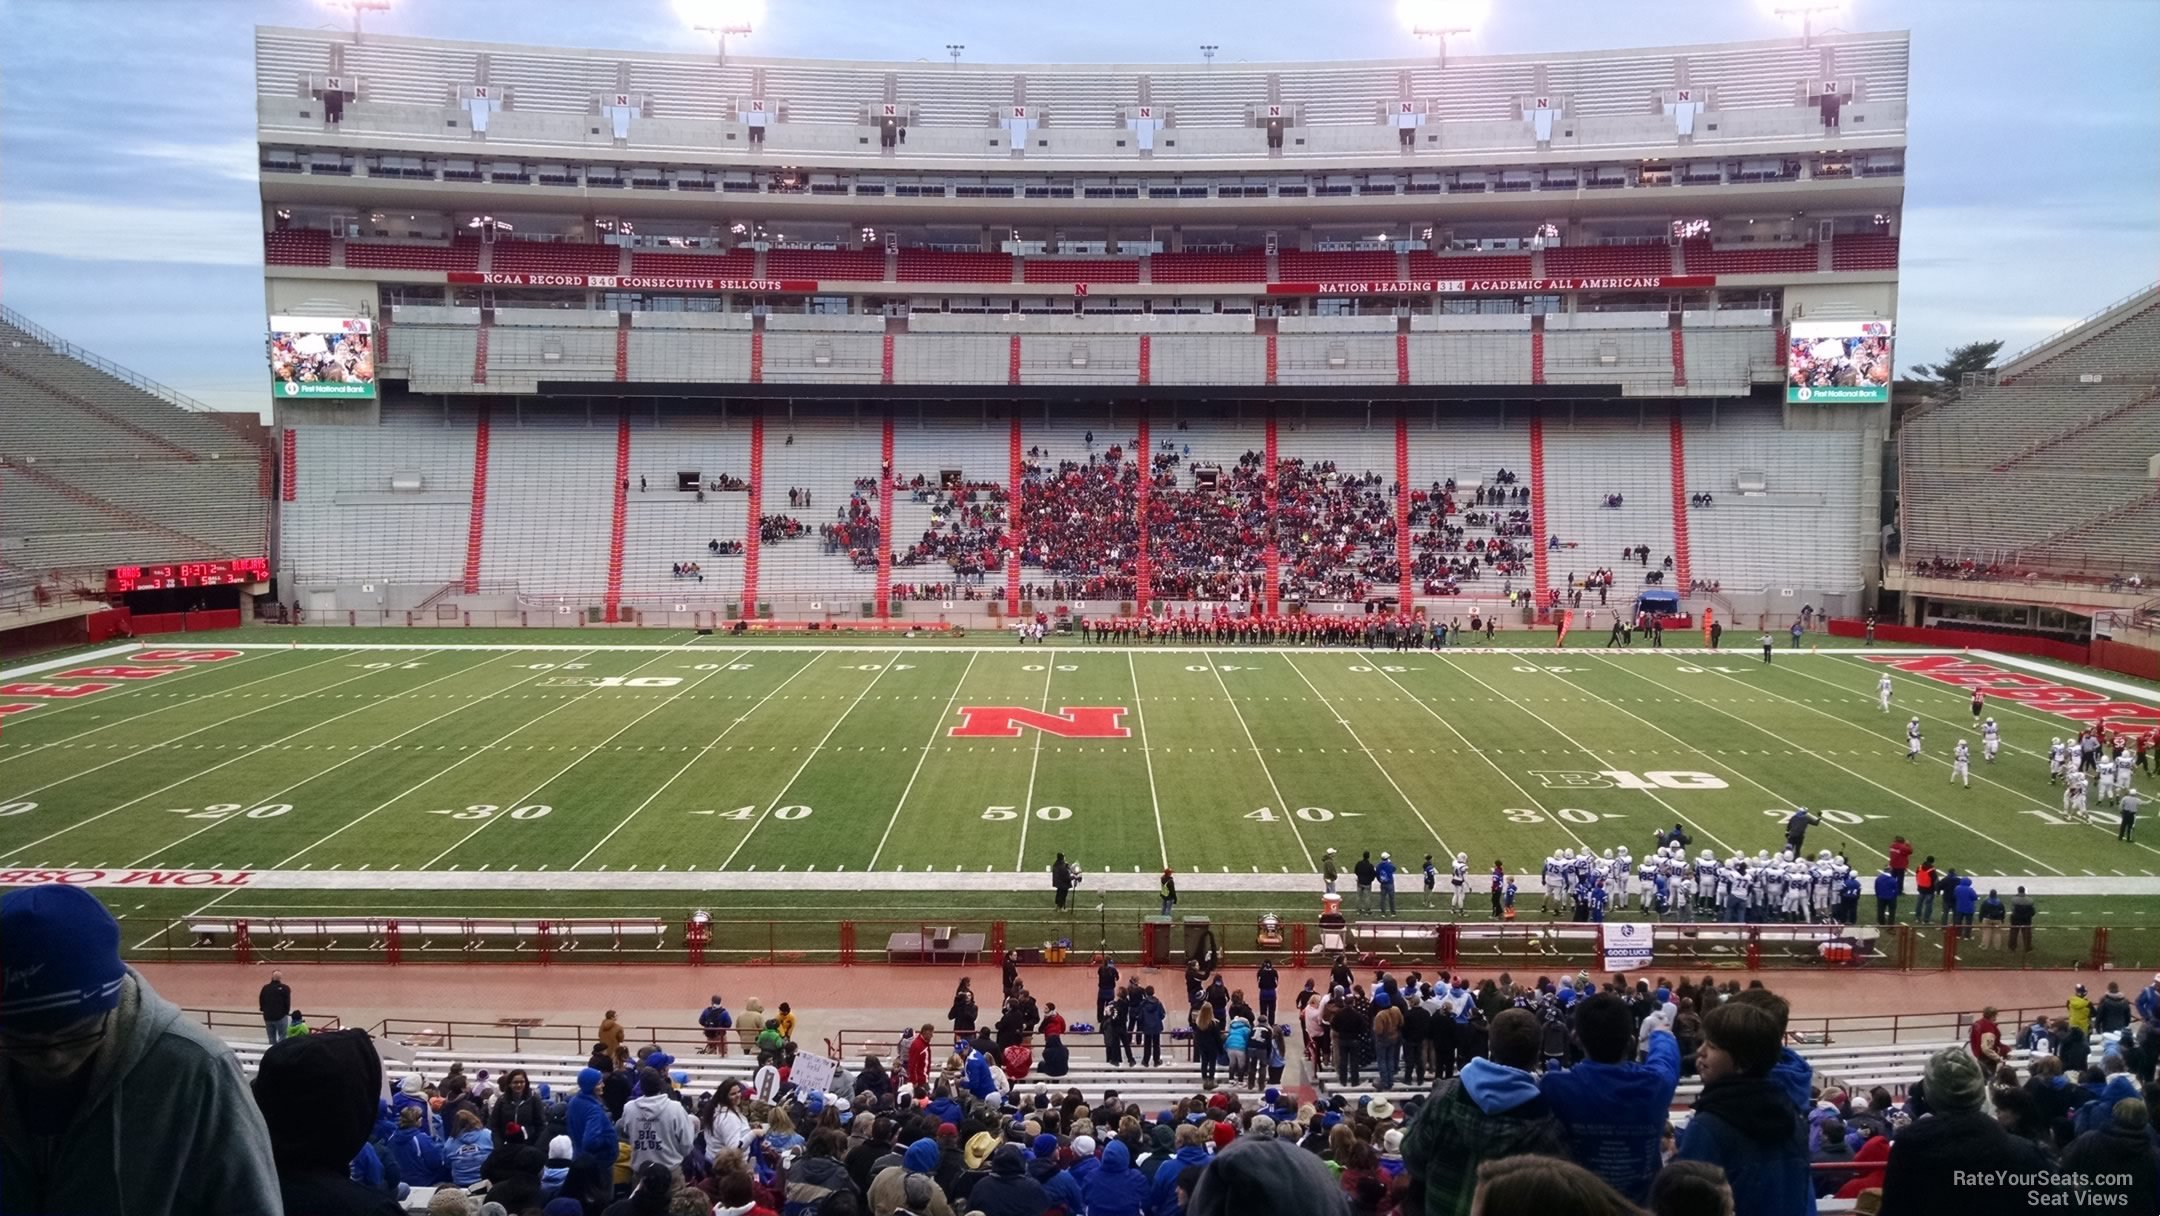 Memorial Stadium Lincoln Seating Chart With Rows